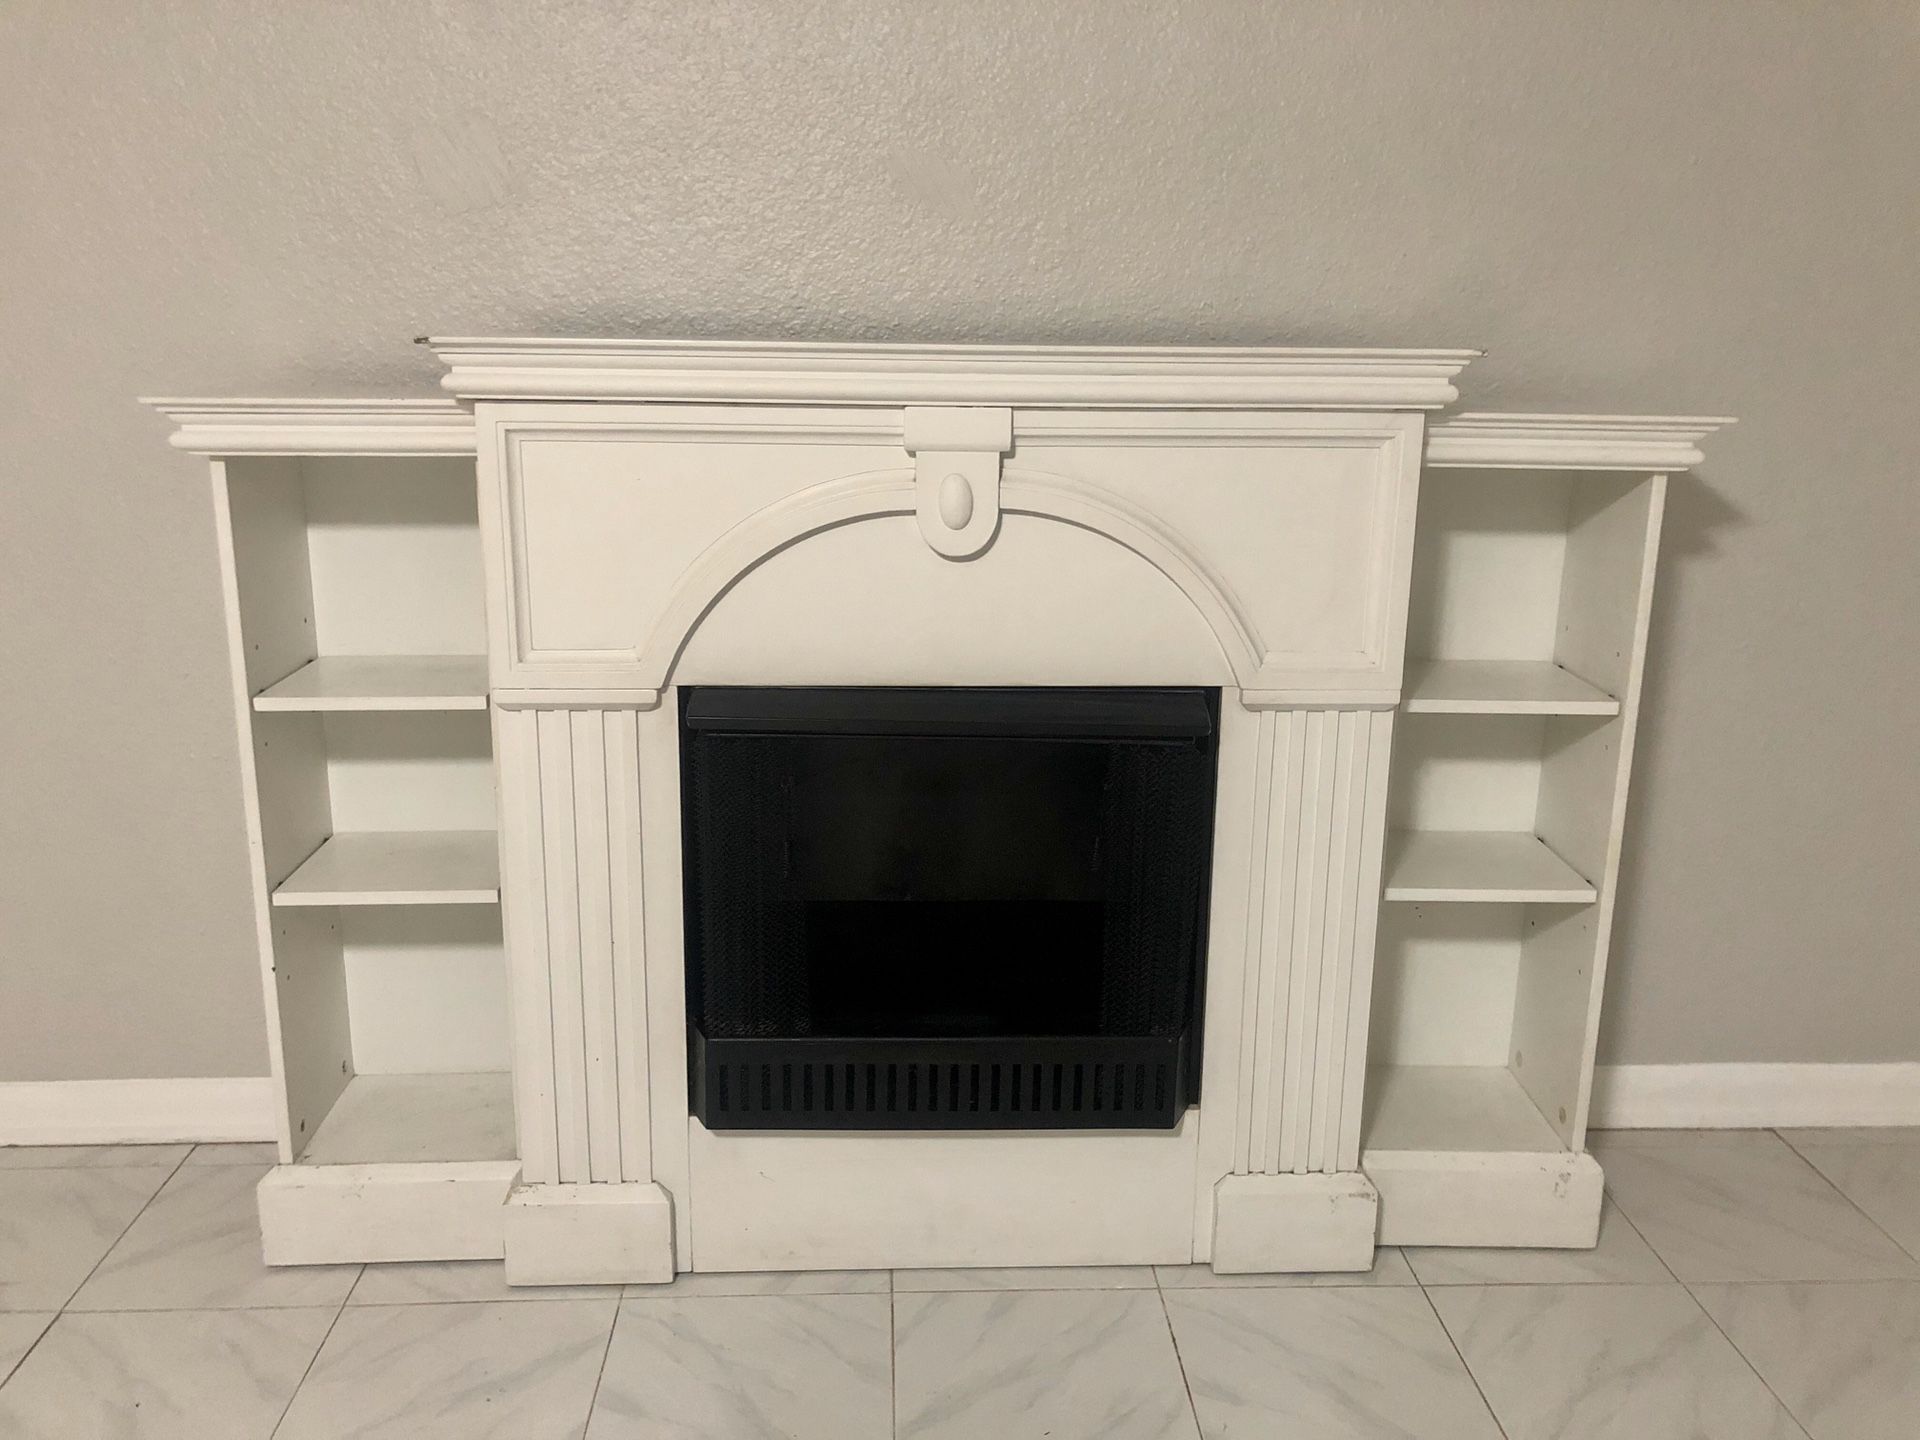 Fax fireplace with insert and adjustable bookshelves